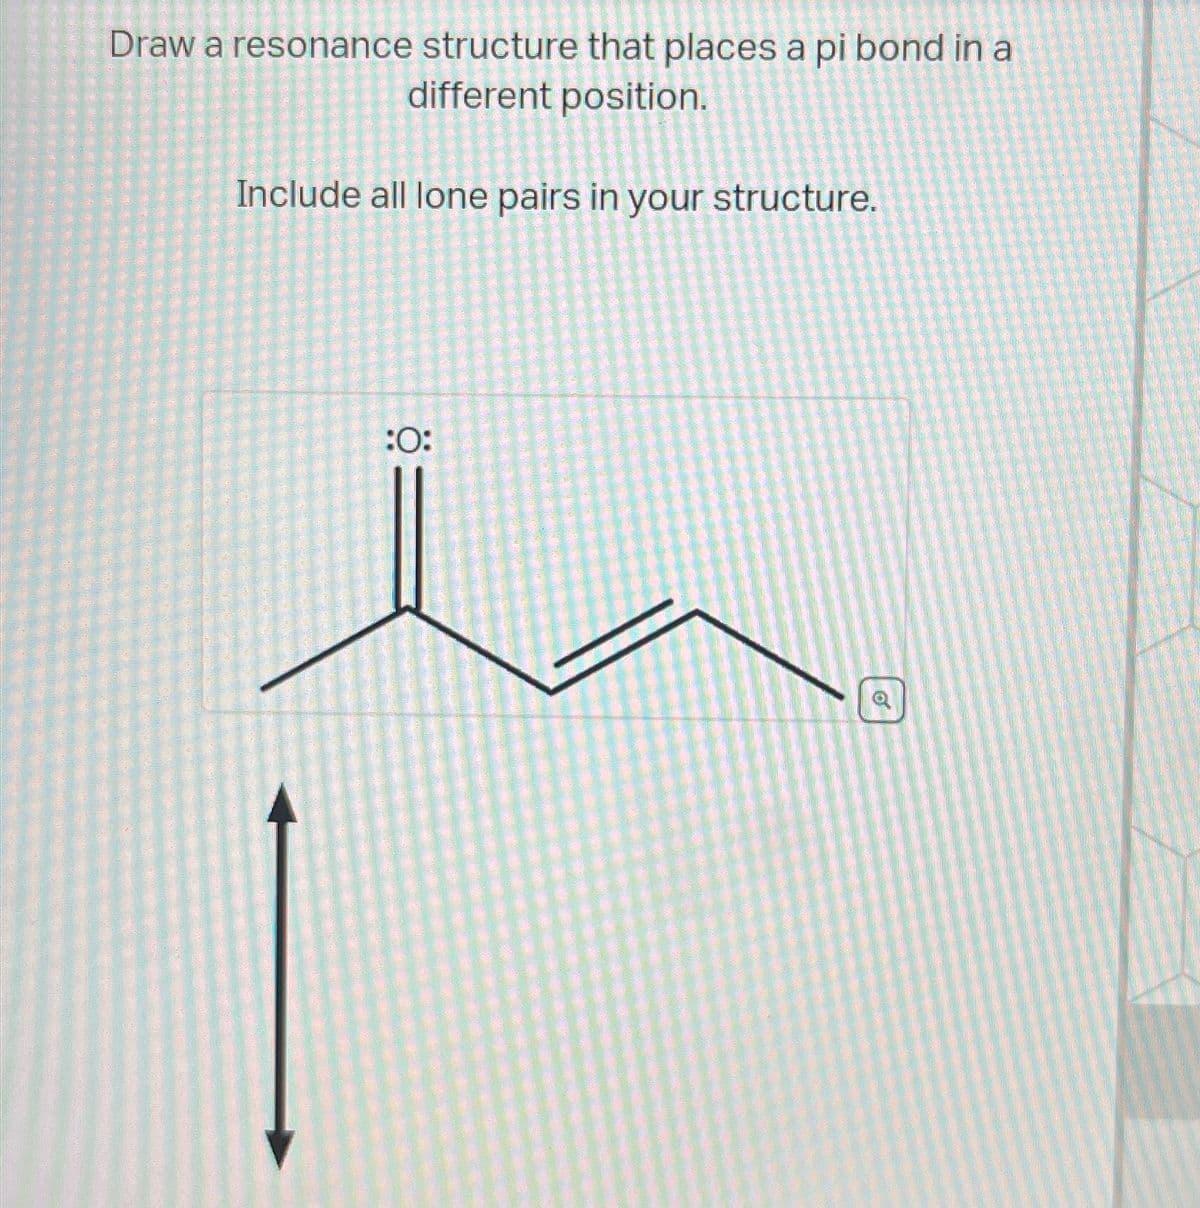 Draw a resonance structure that places a pi bond in a
different position.
Include all lone pairs in your structure.
:0:
o